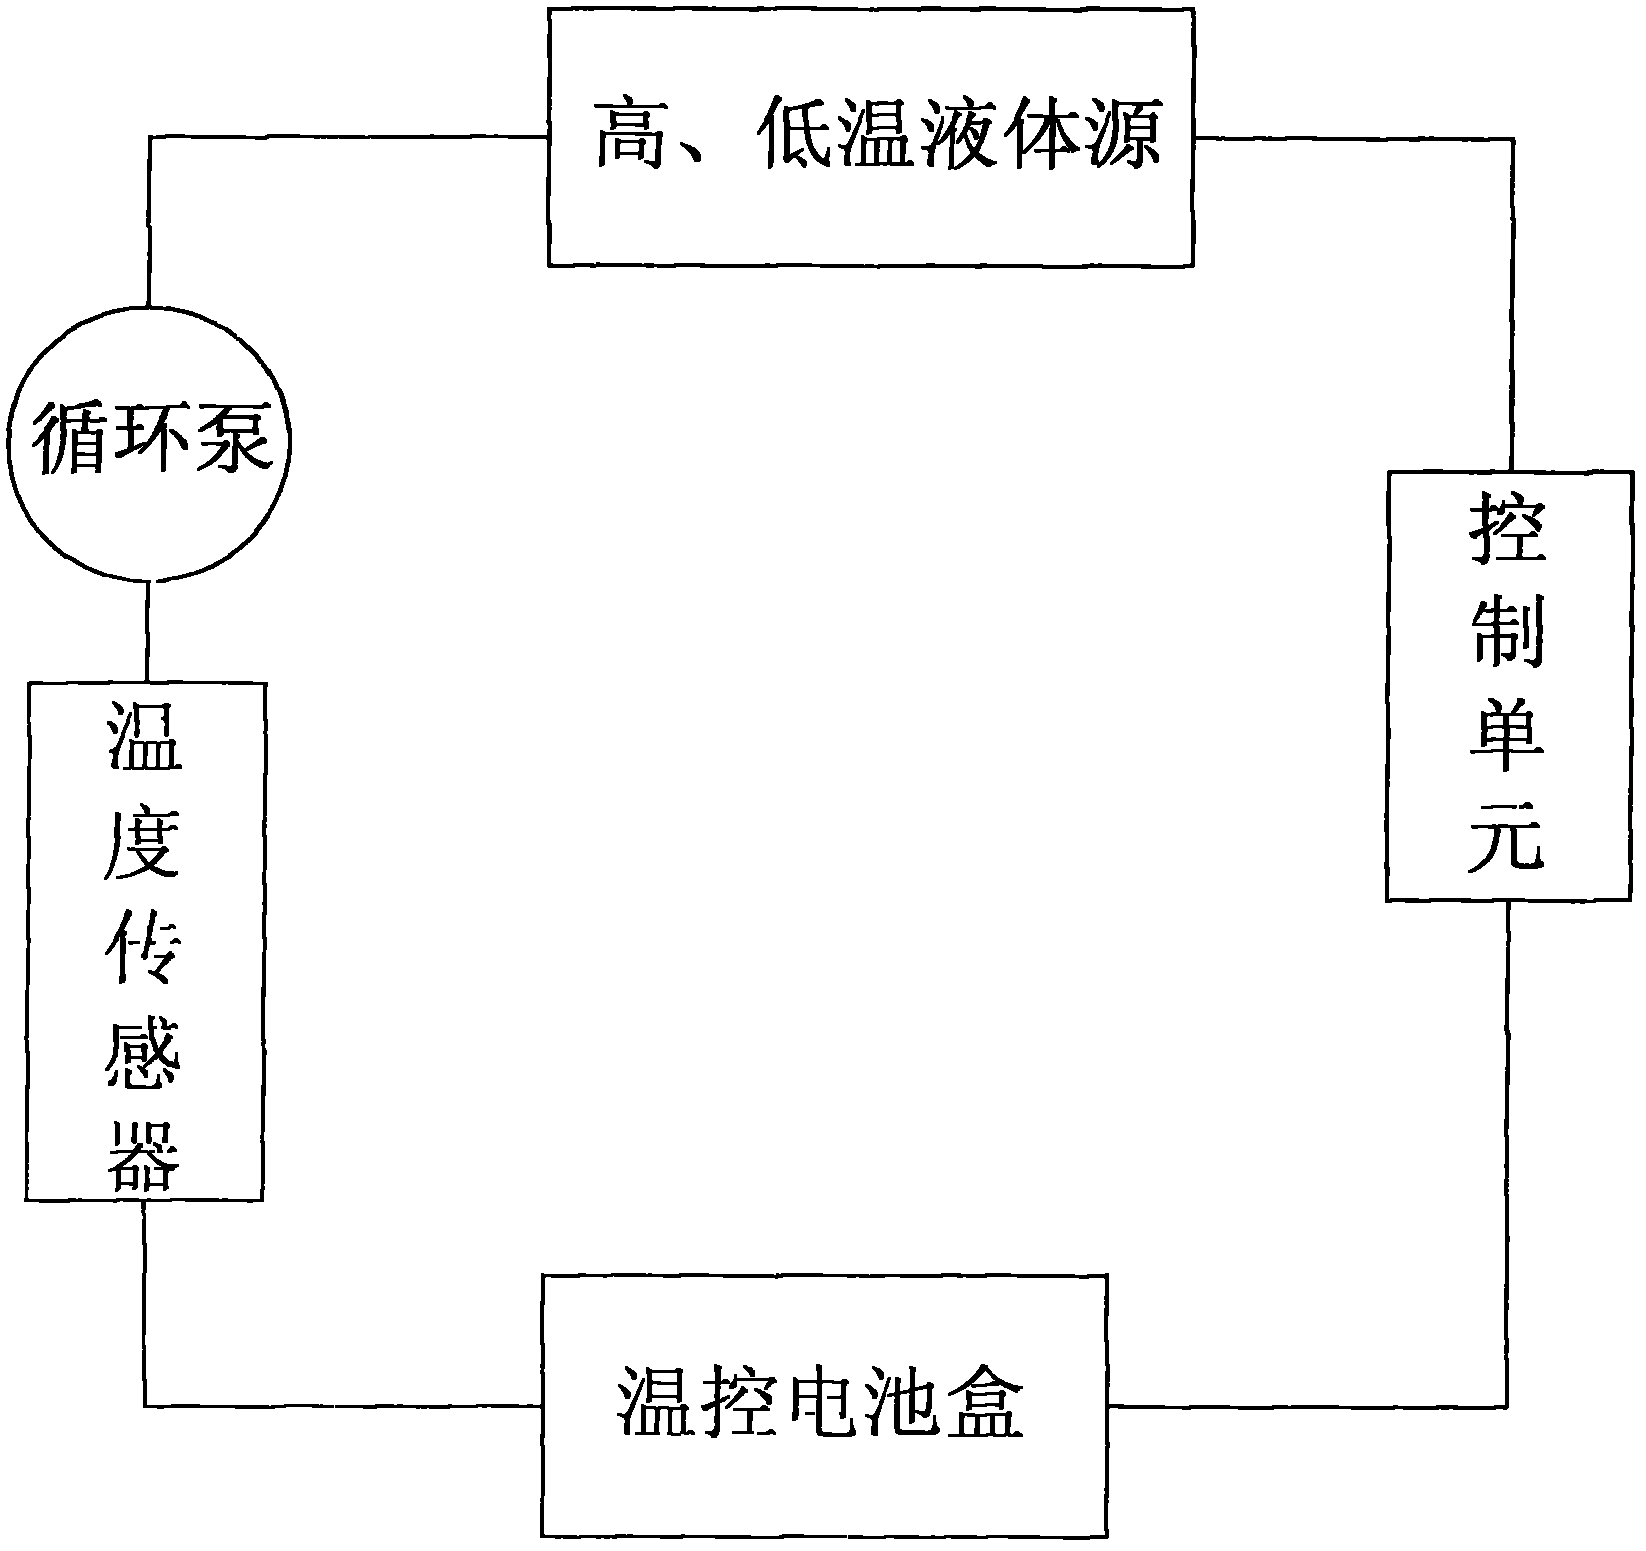 Temperature control device for power lithium battery